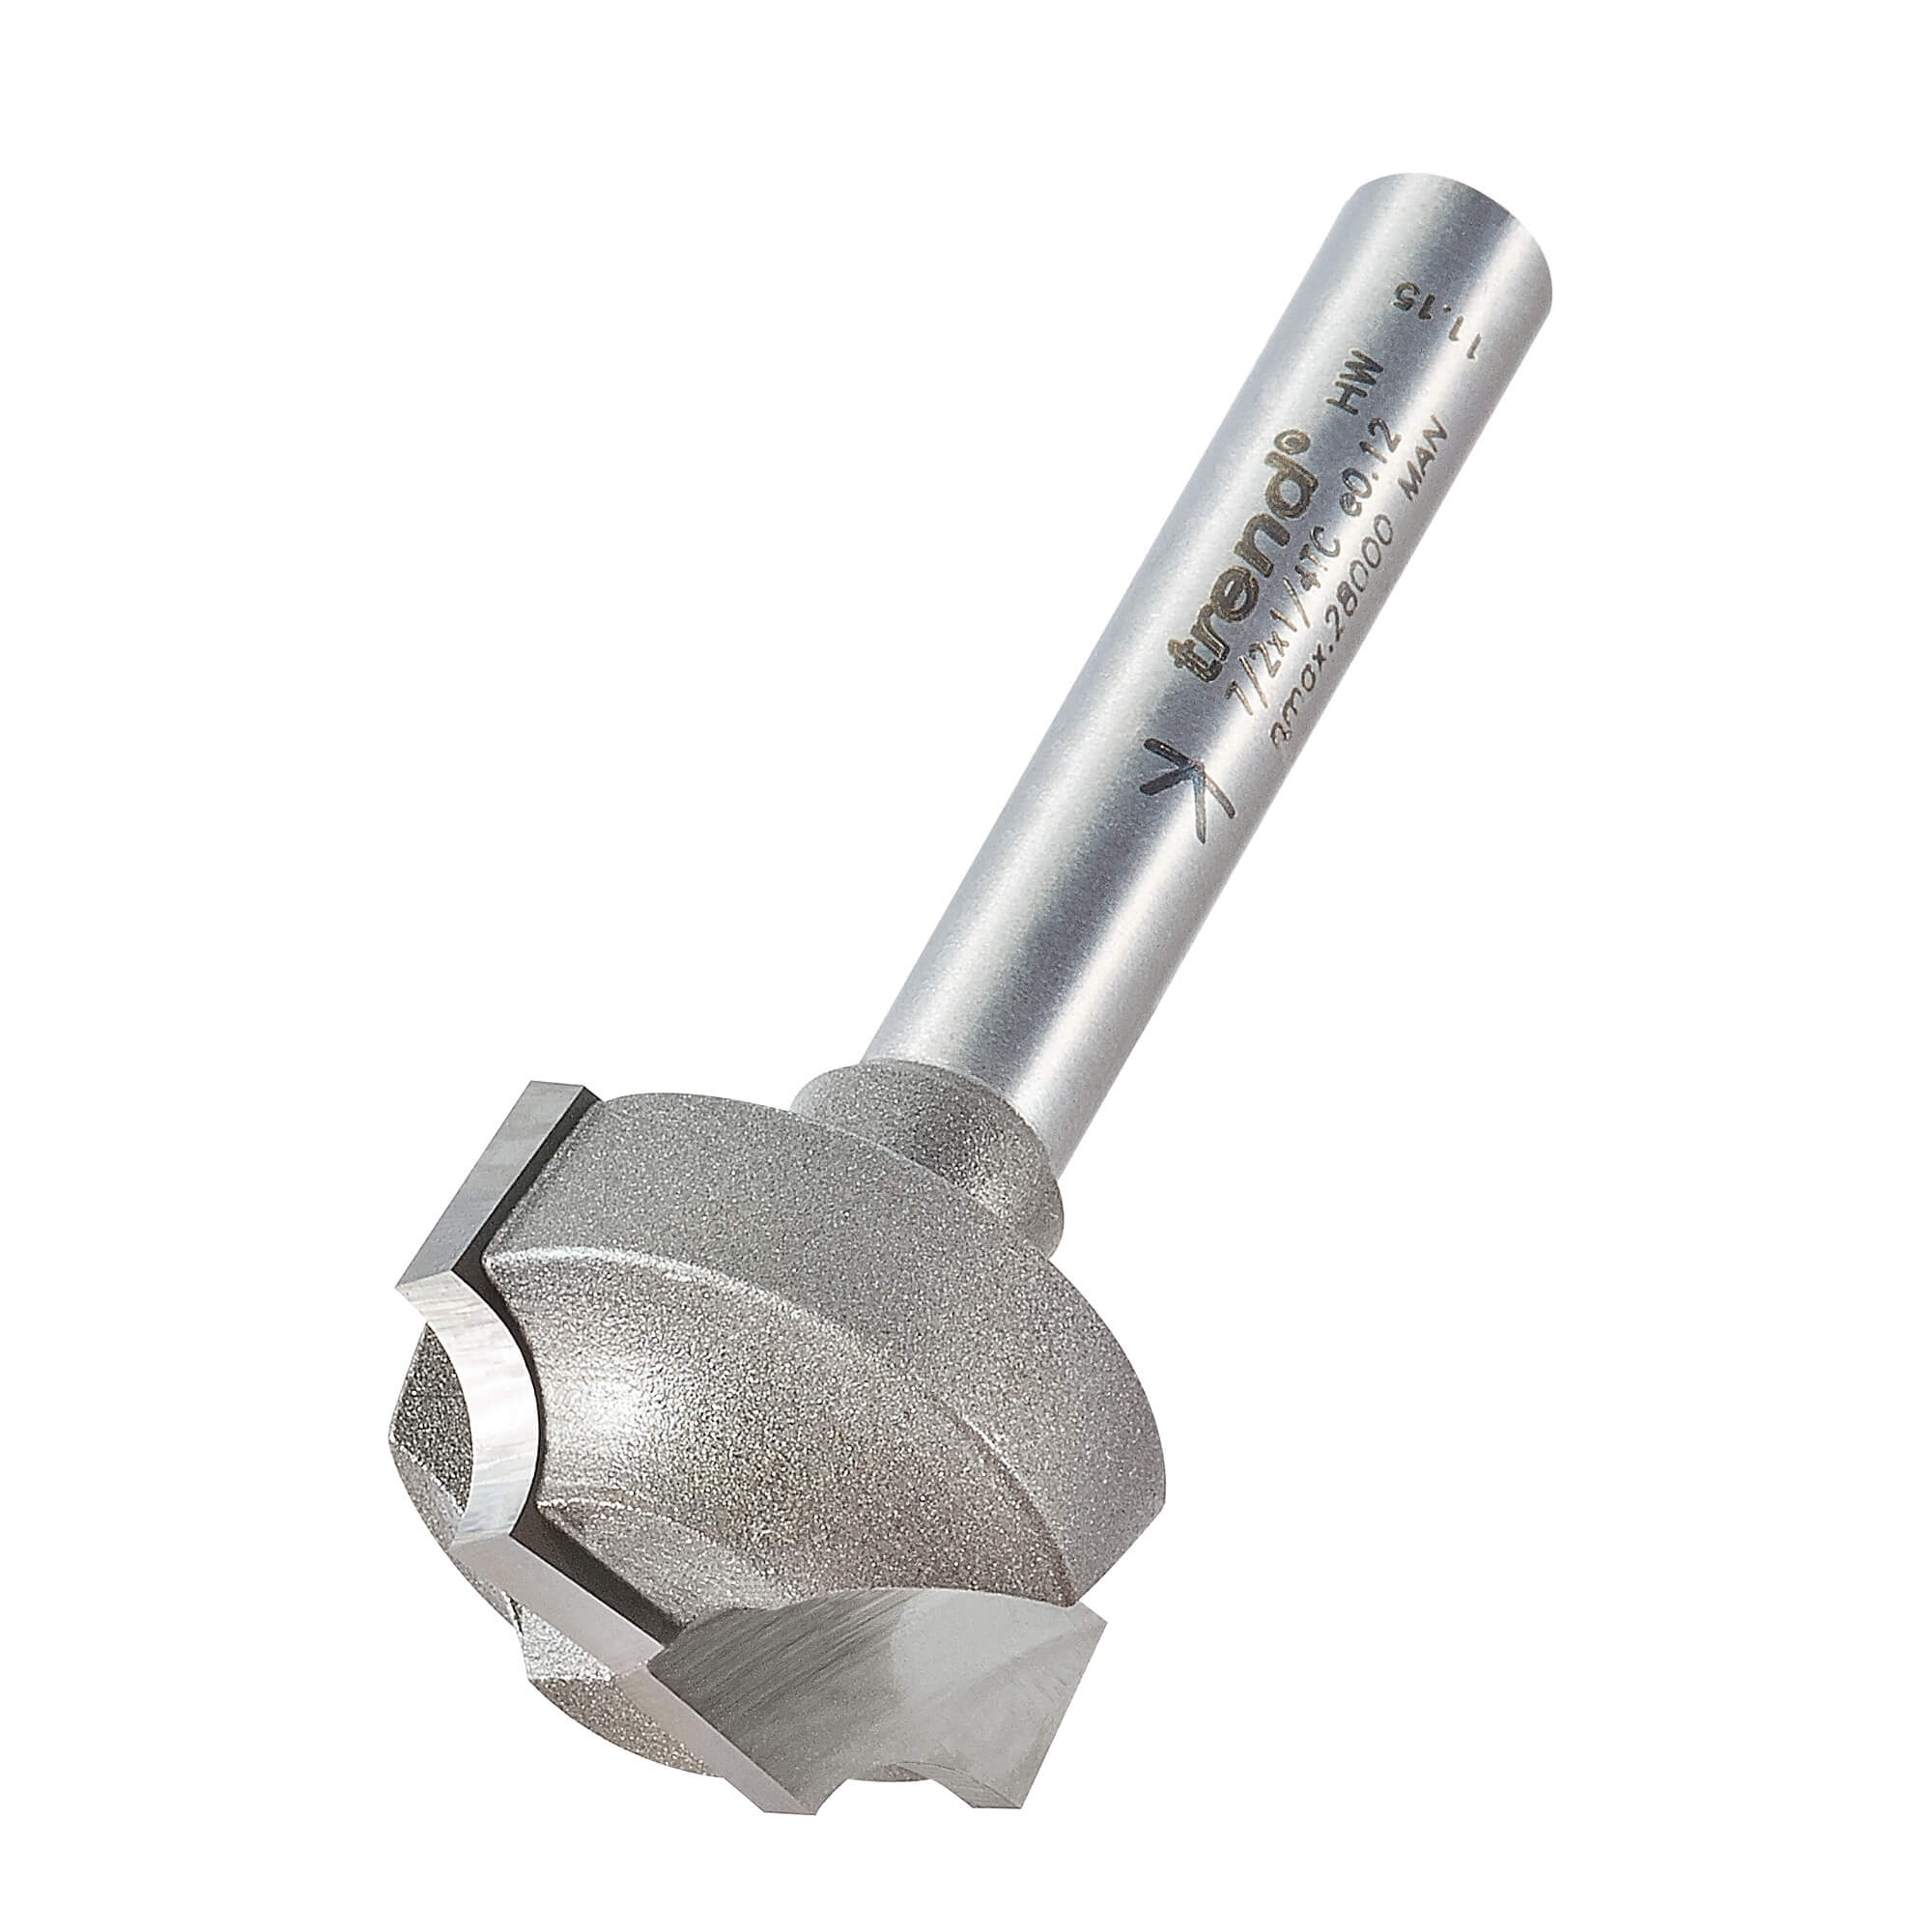 Image of Trend Ovolo Rounding Over Router Cutter 22mm 12mm 1/4"